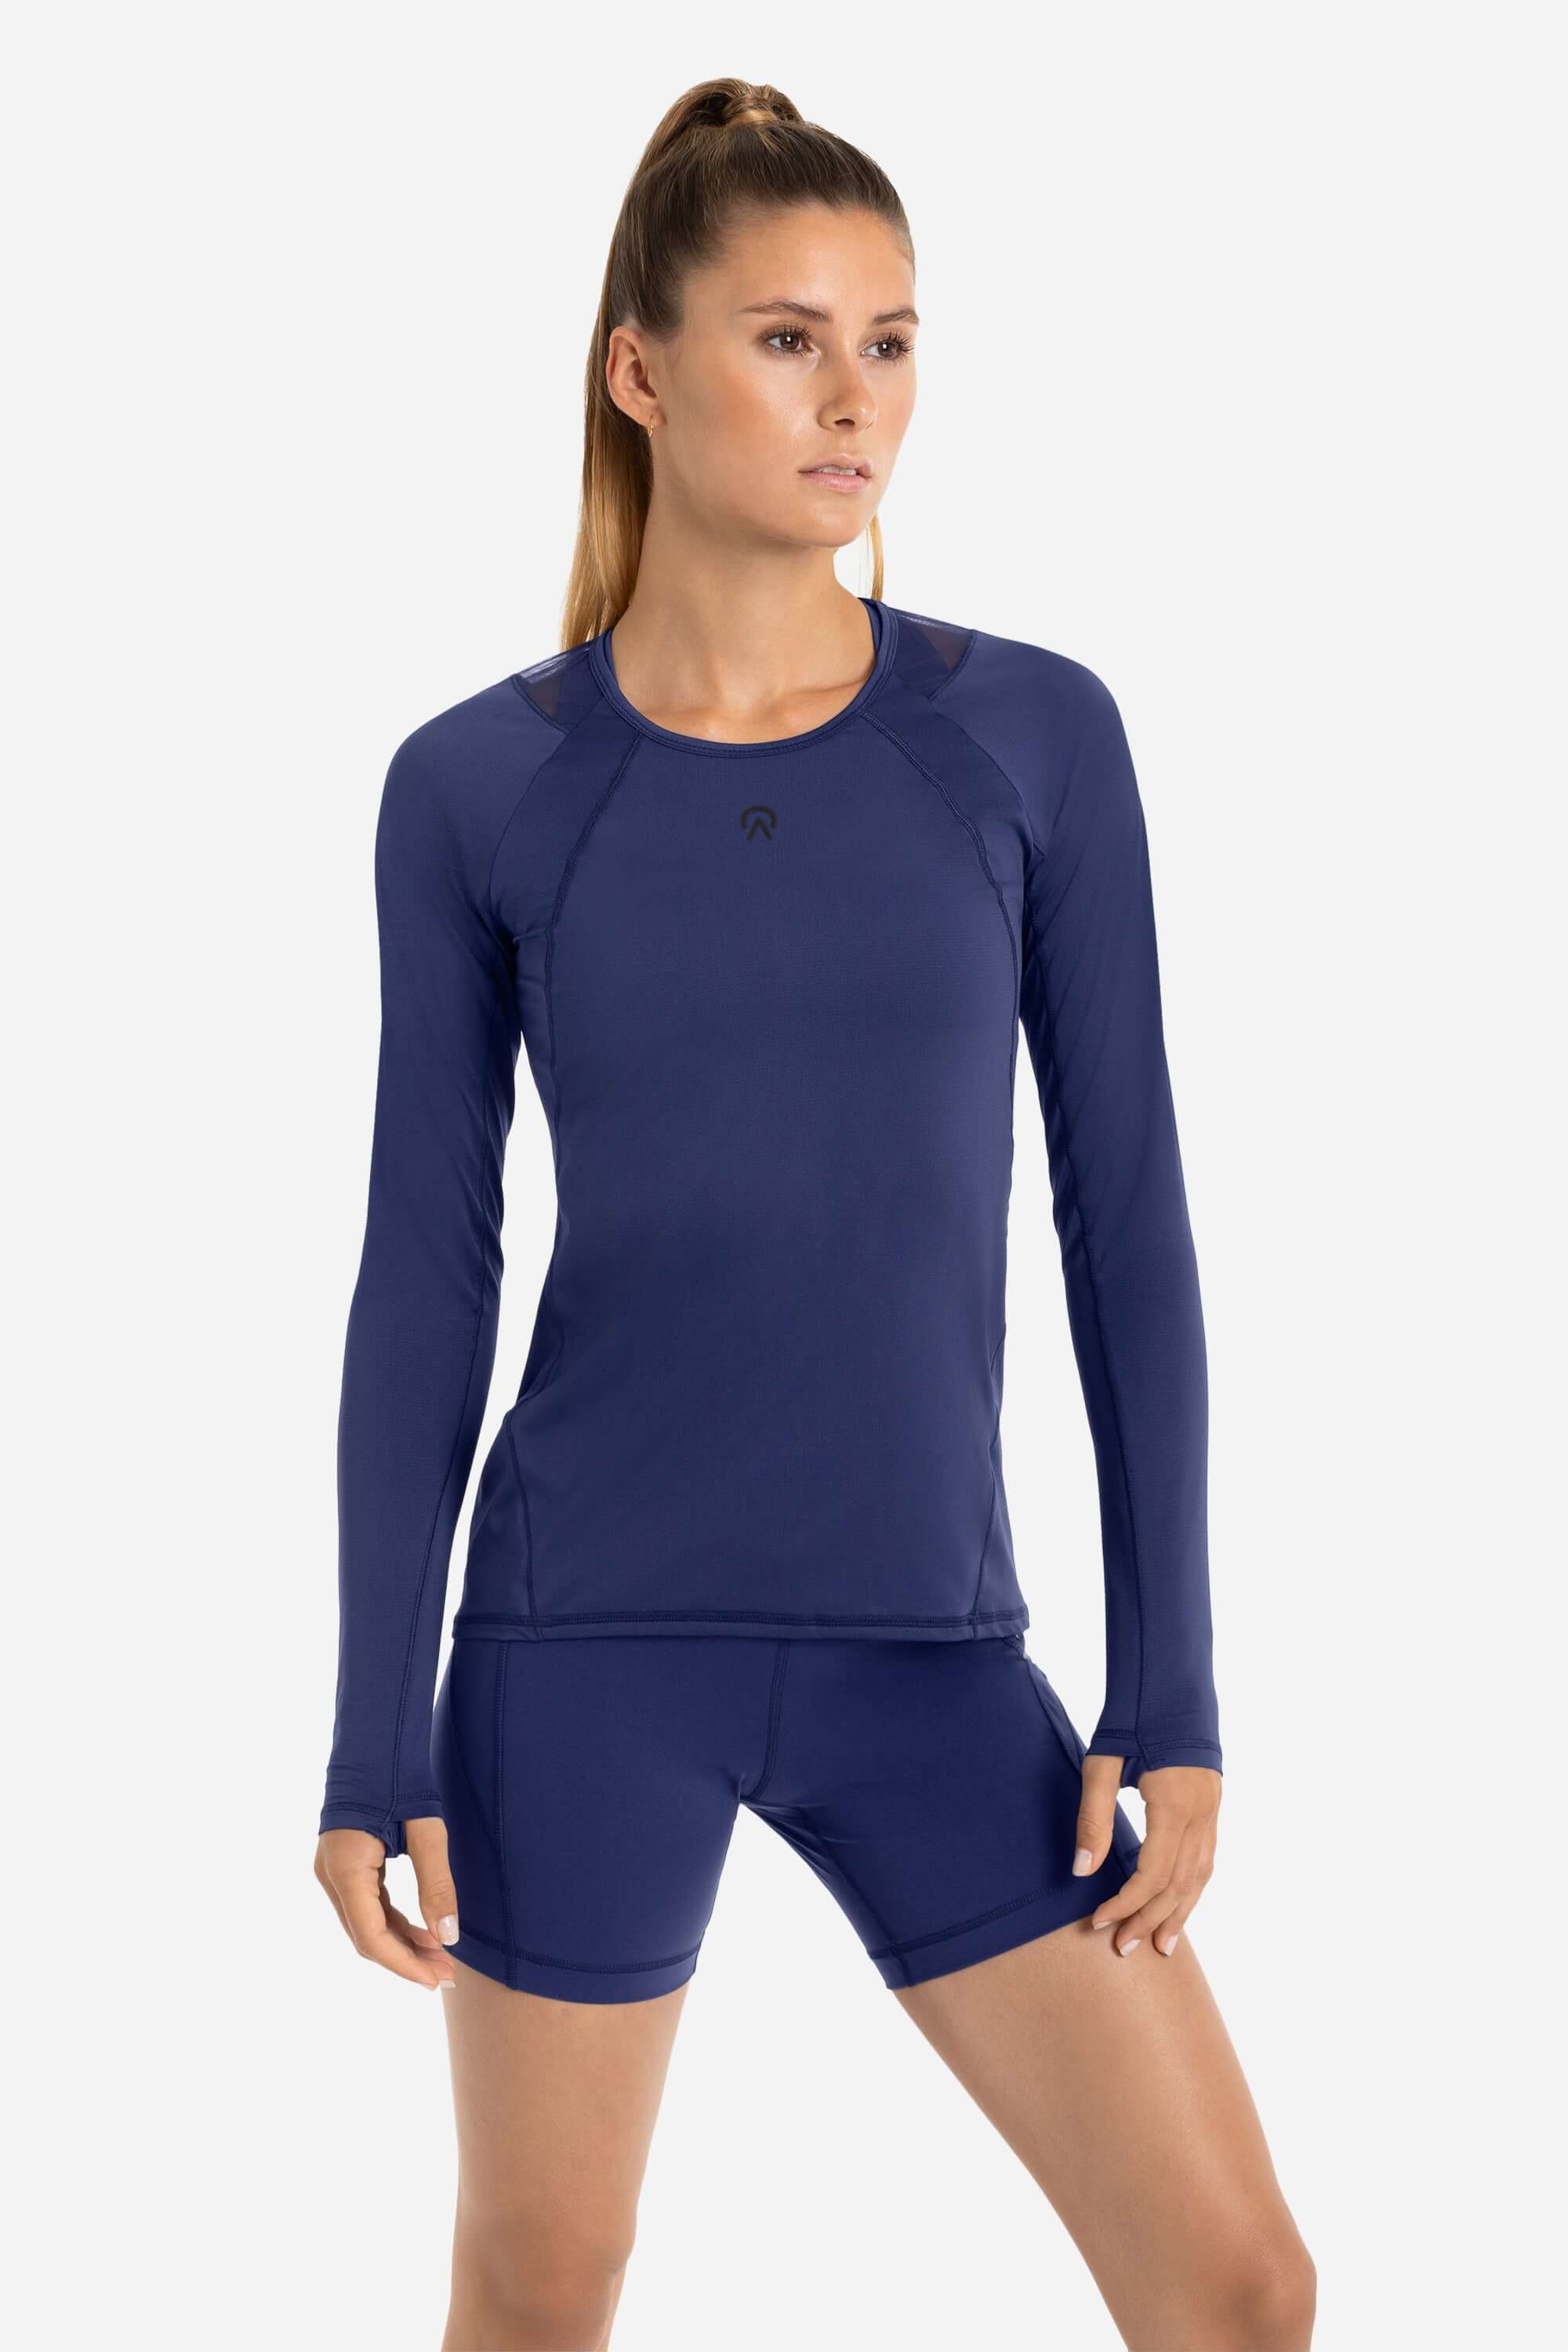 Women in a blue long sleeve workout t-shirt with blue short tights